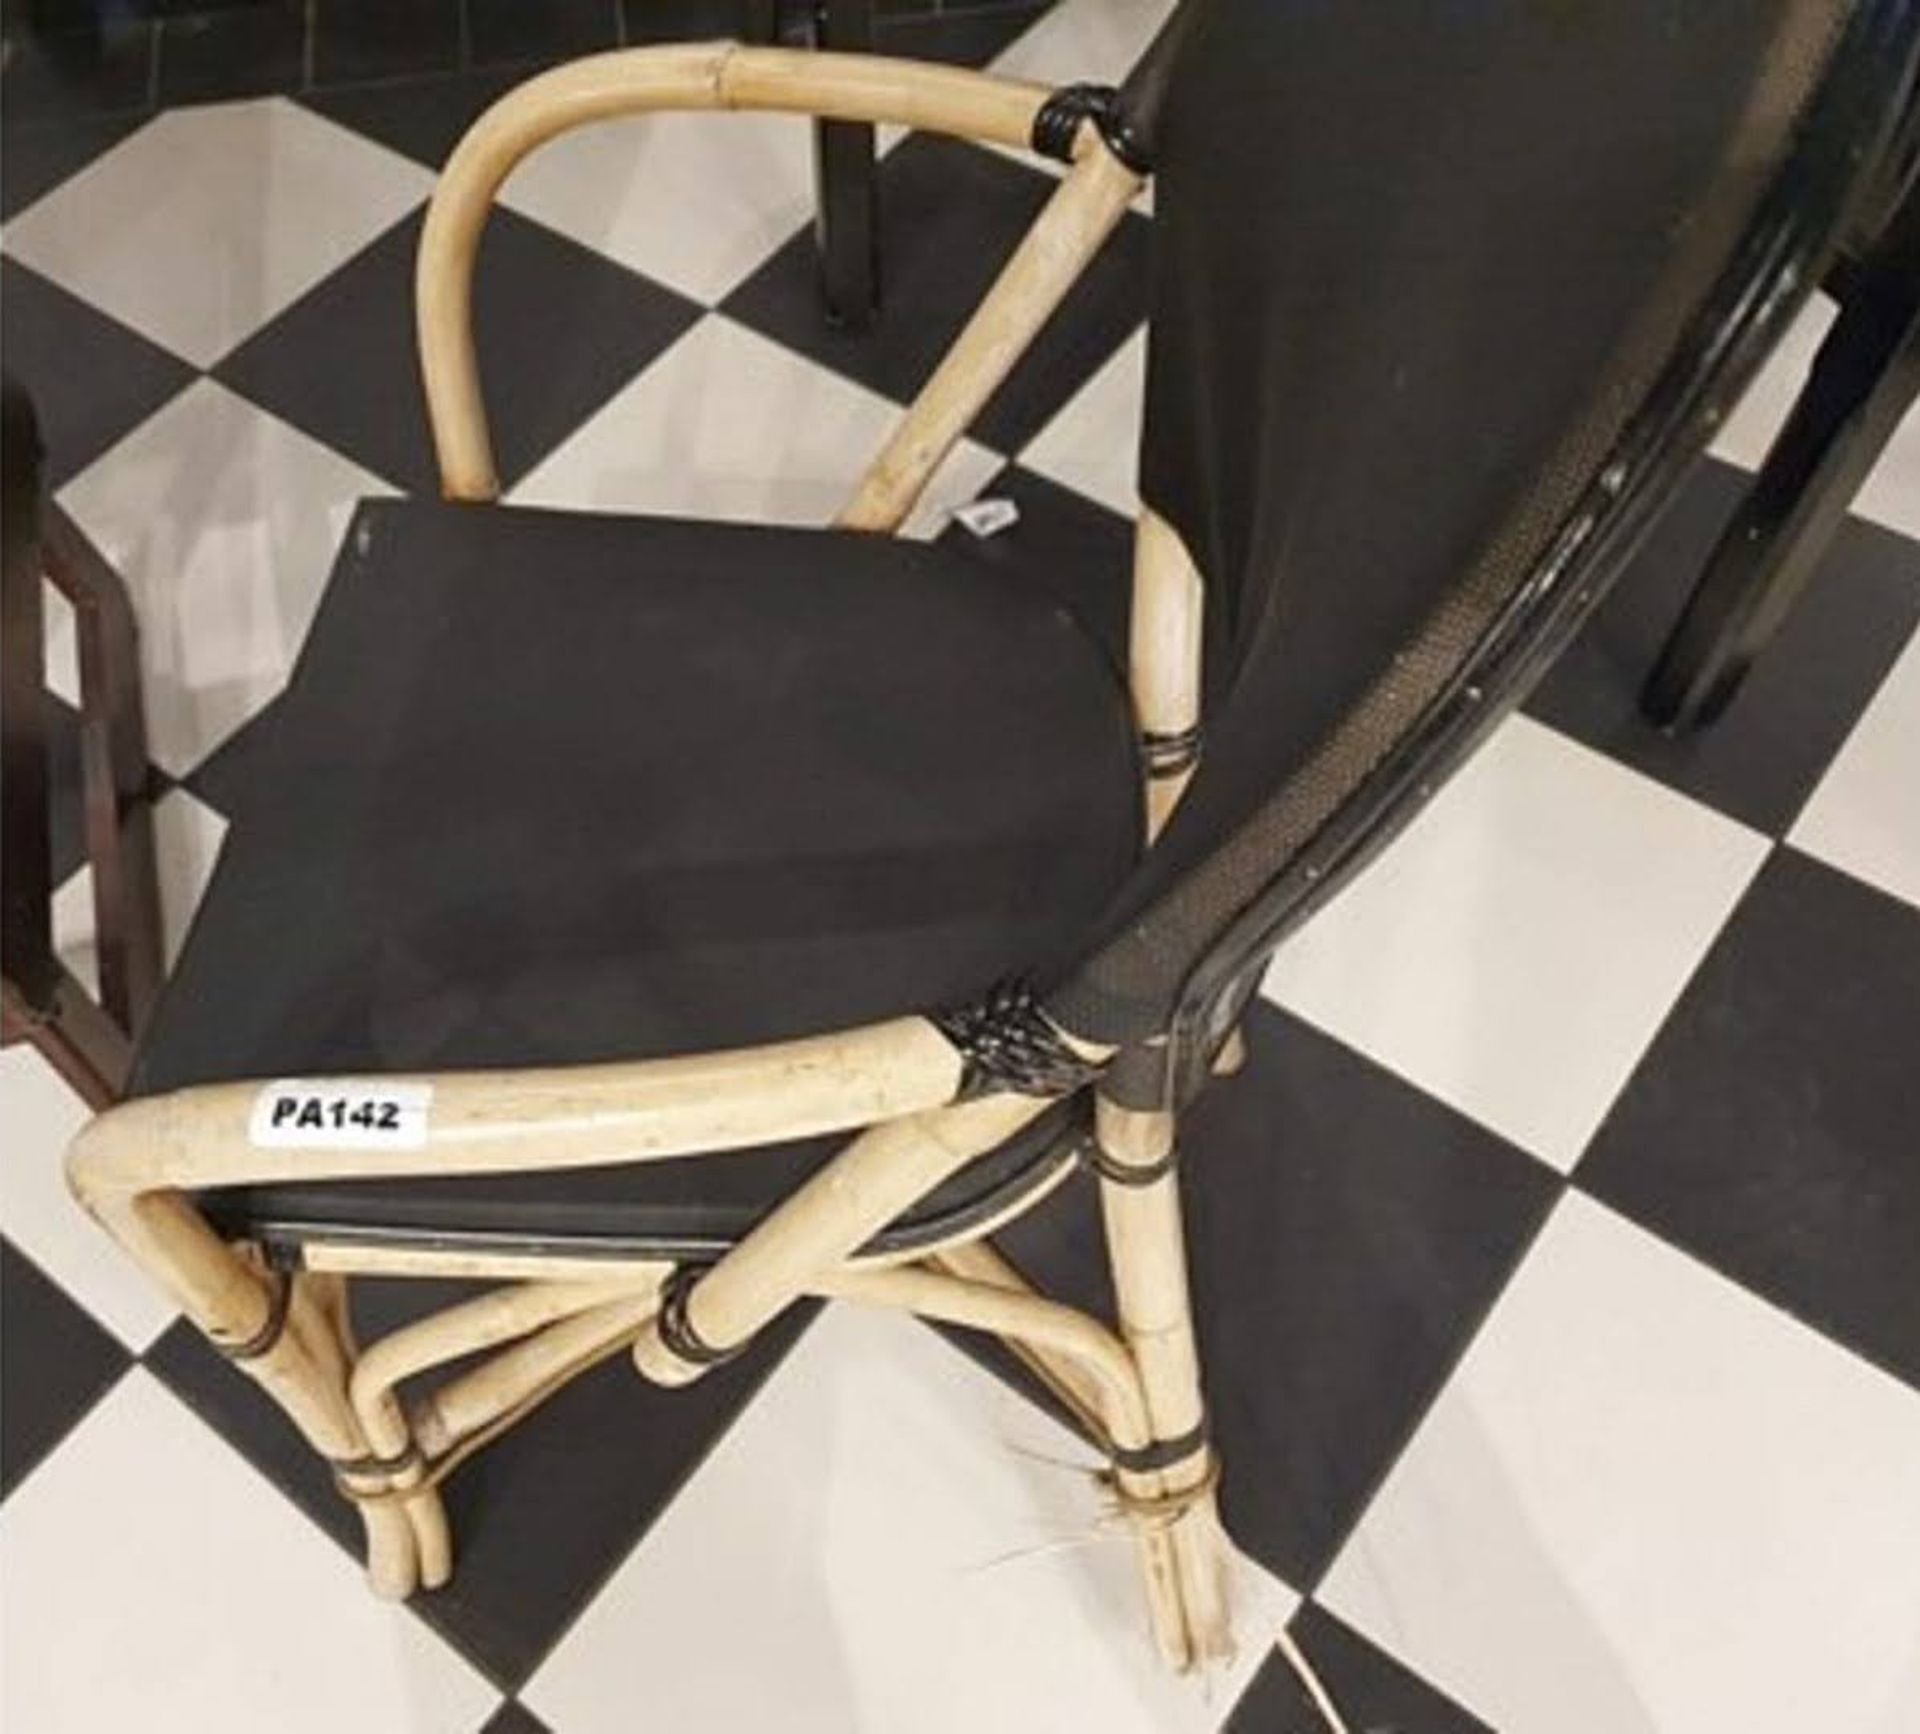 2 x Bamboo Studio Chair With Black Seat and Back Rest - Features the Name 'PAUL' Printed on the Back - Image 4 of 6